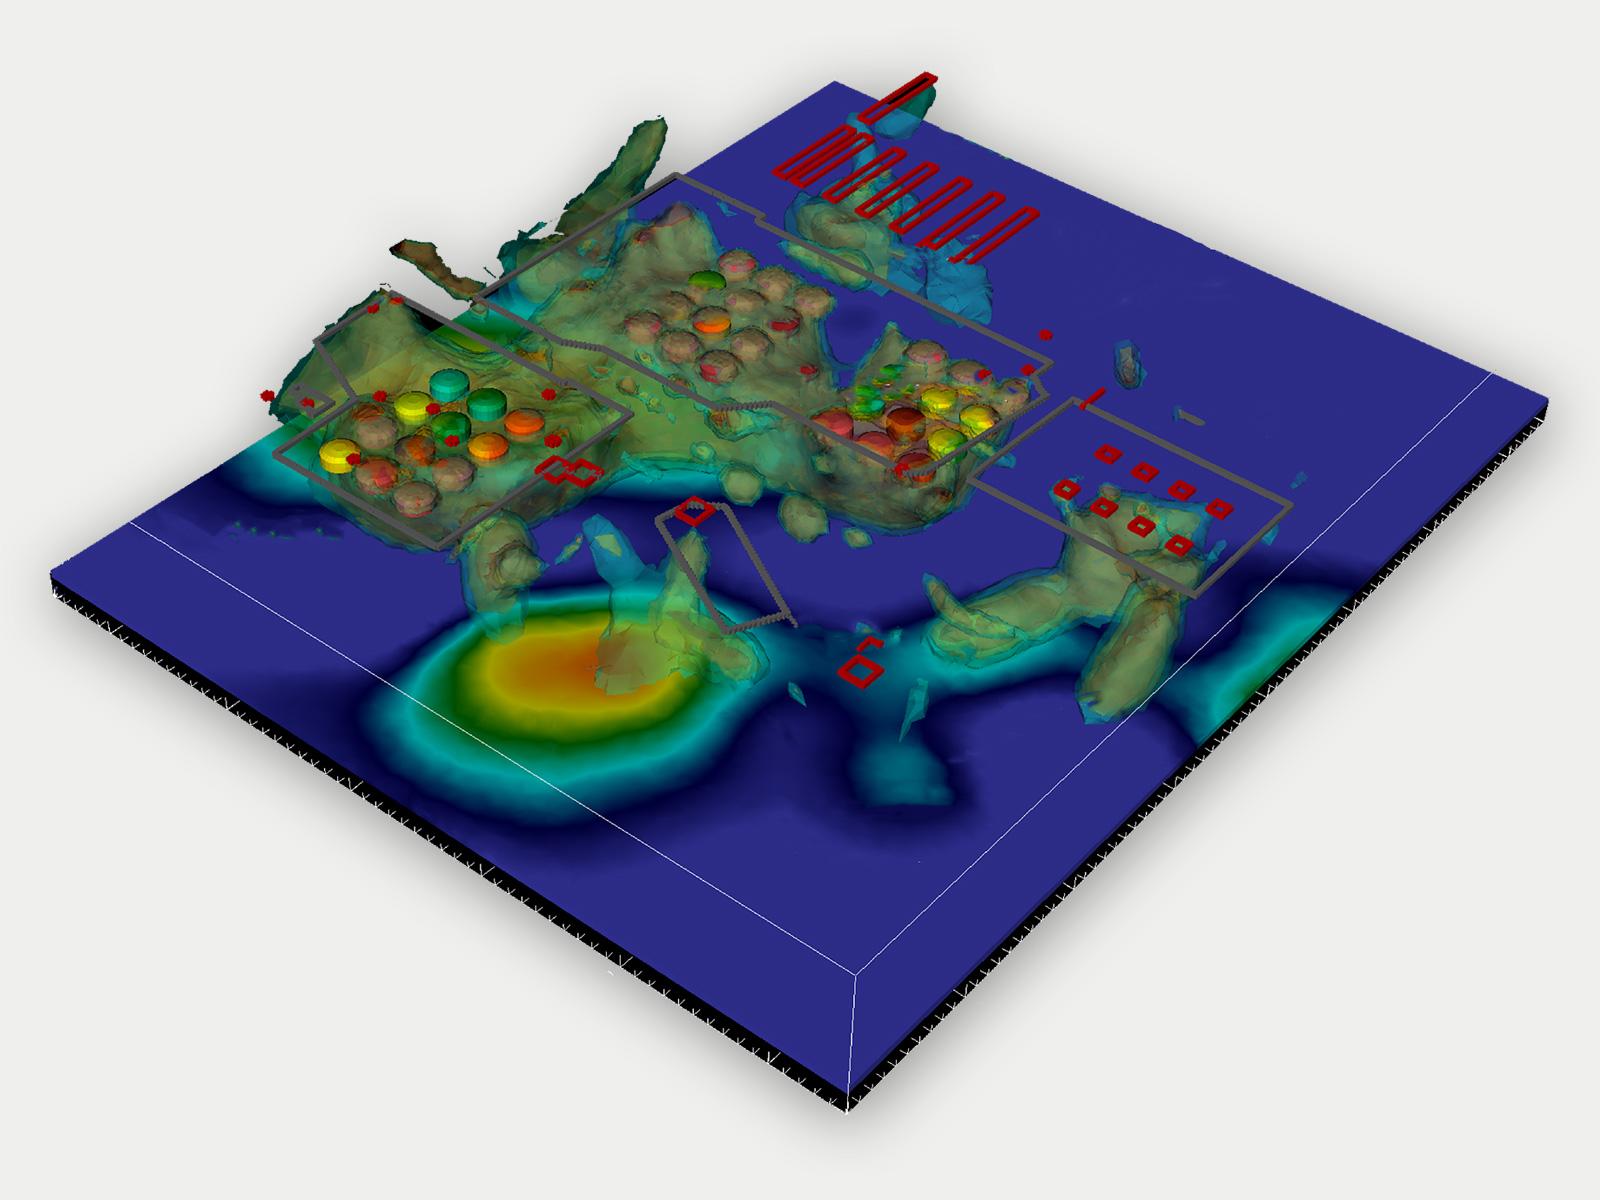 Computer graphic of E4D, showing the colorful three-dimensional image of what's underground.